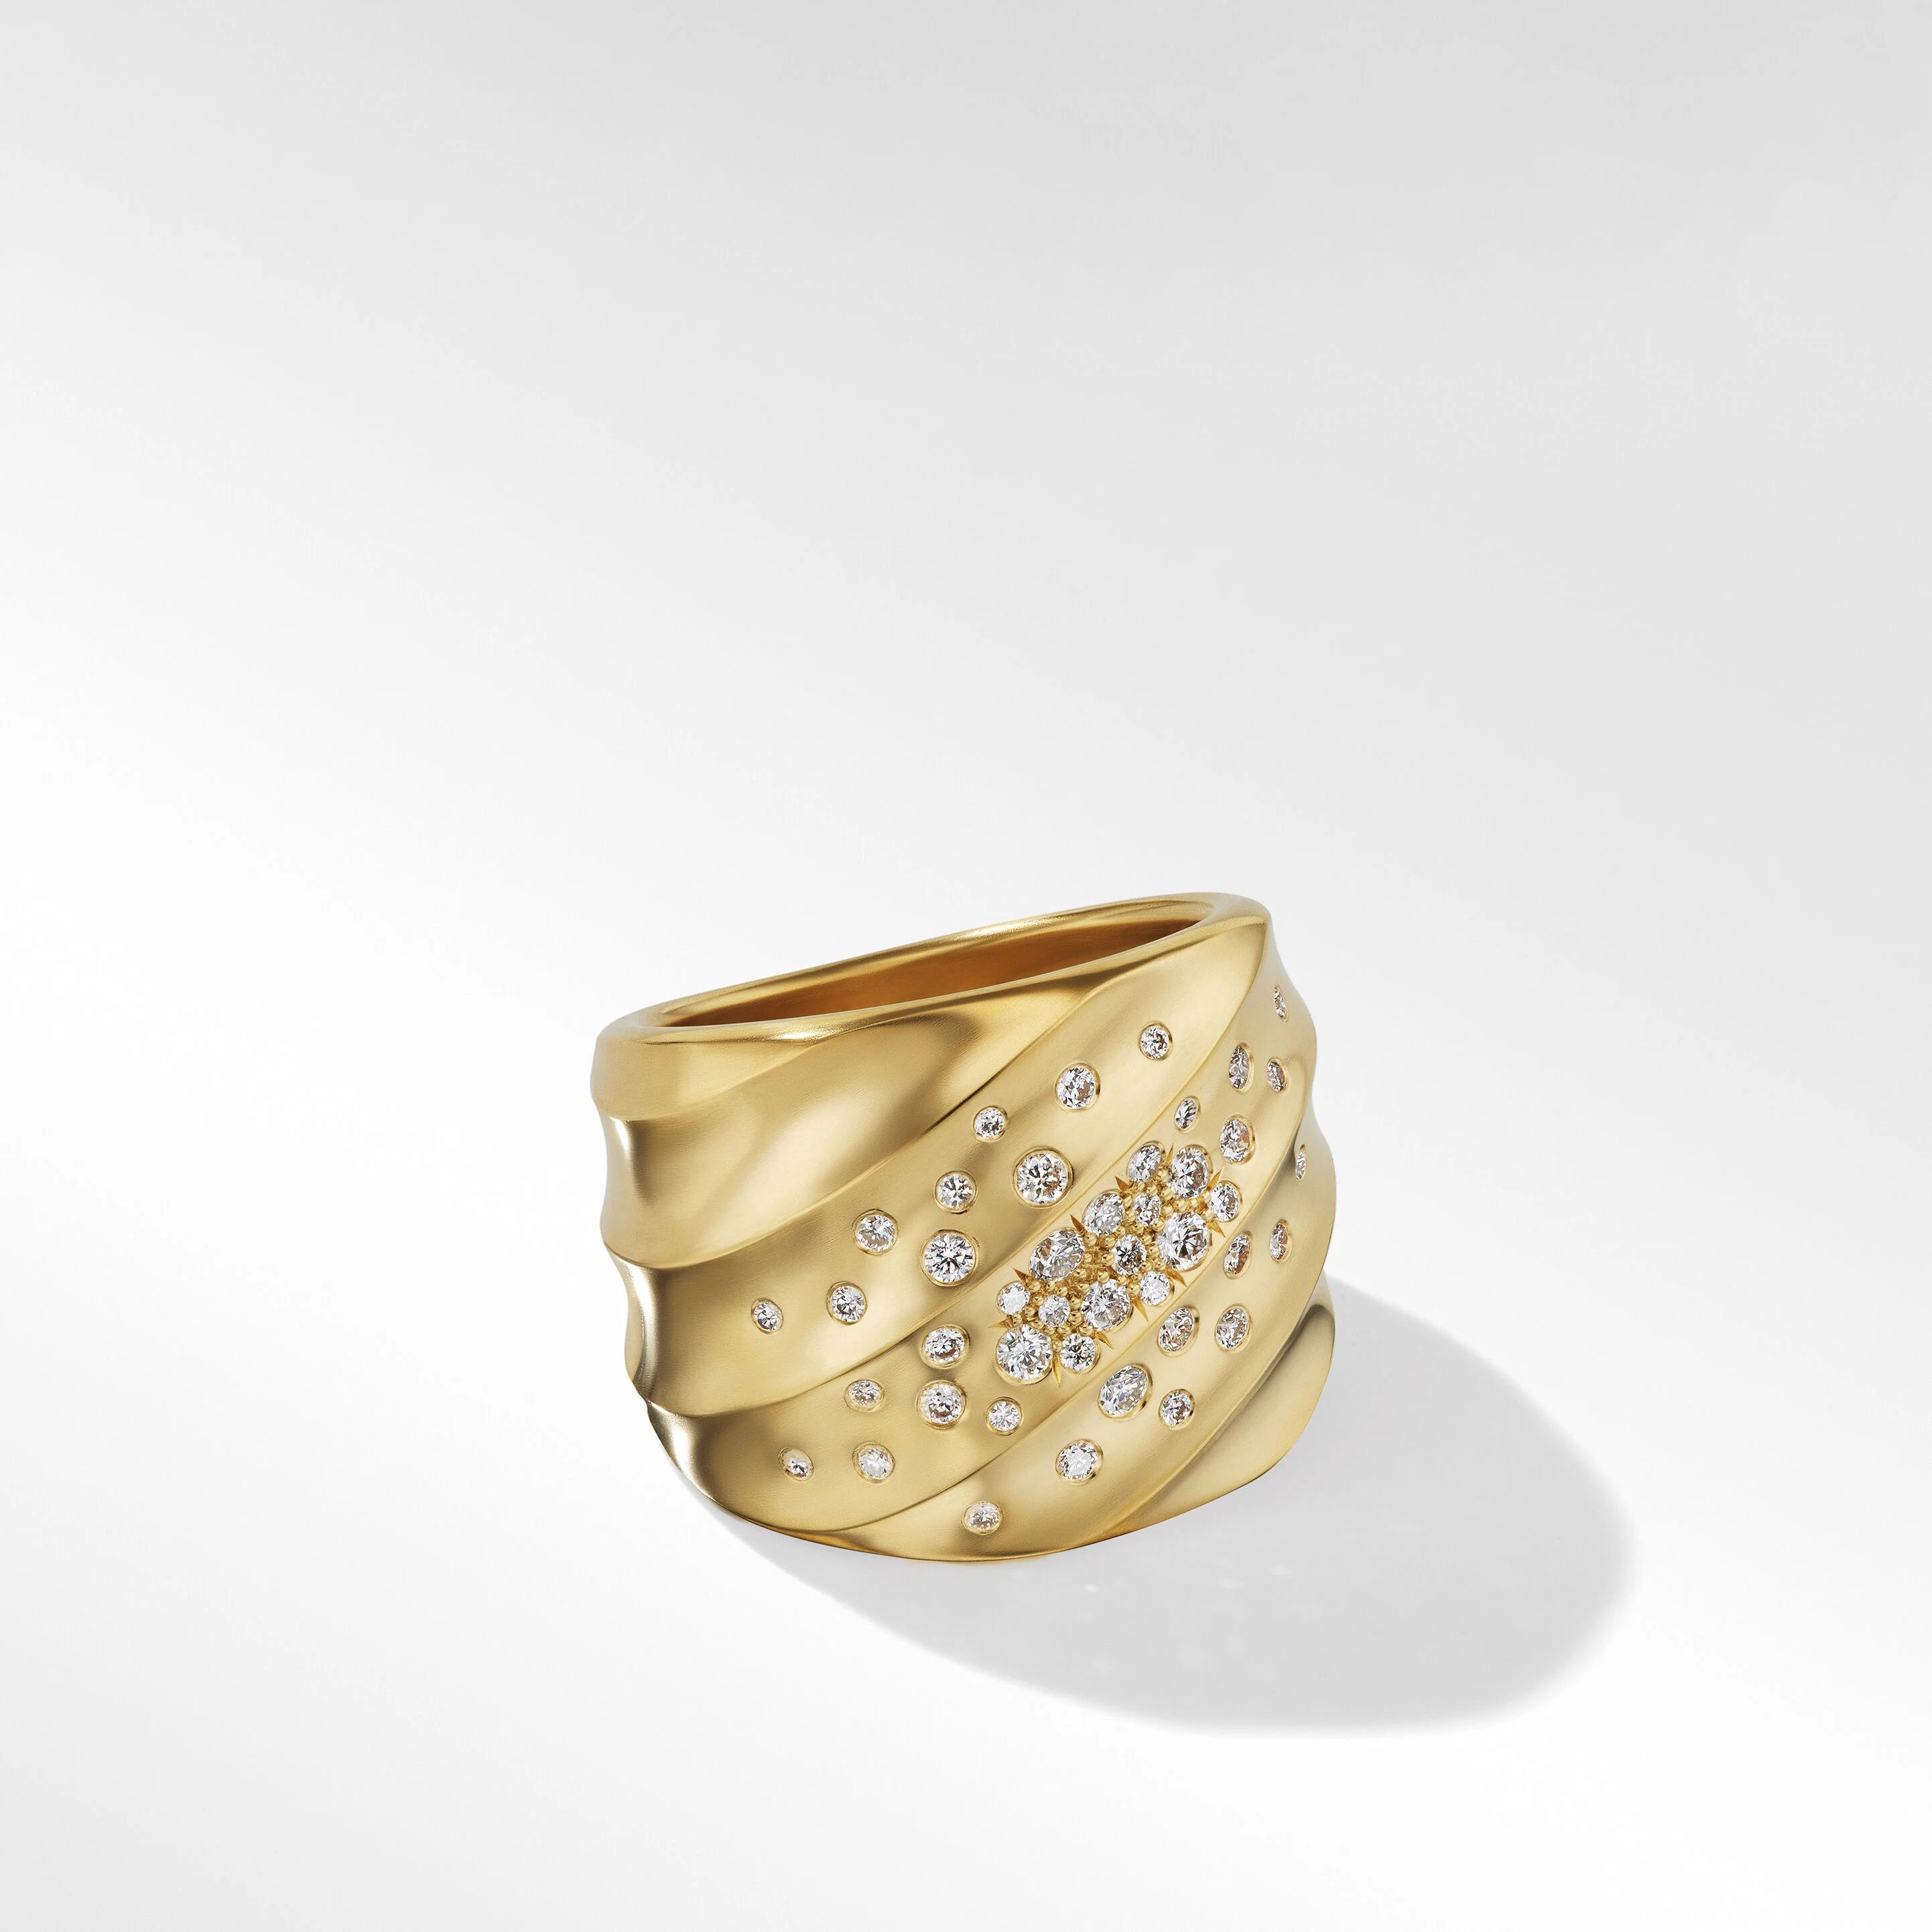 Cable Edge® Saddle Ring in Recycled 18K Yellow Gold with Pavé Diamonds | David Yurman